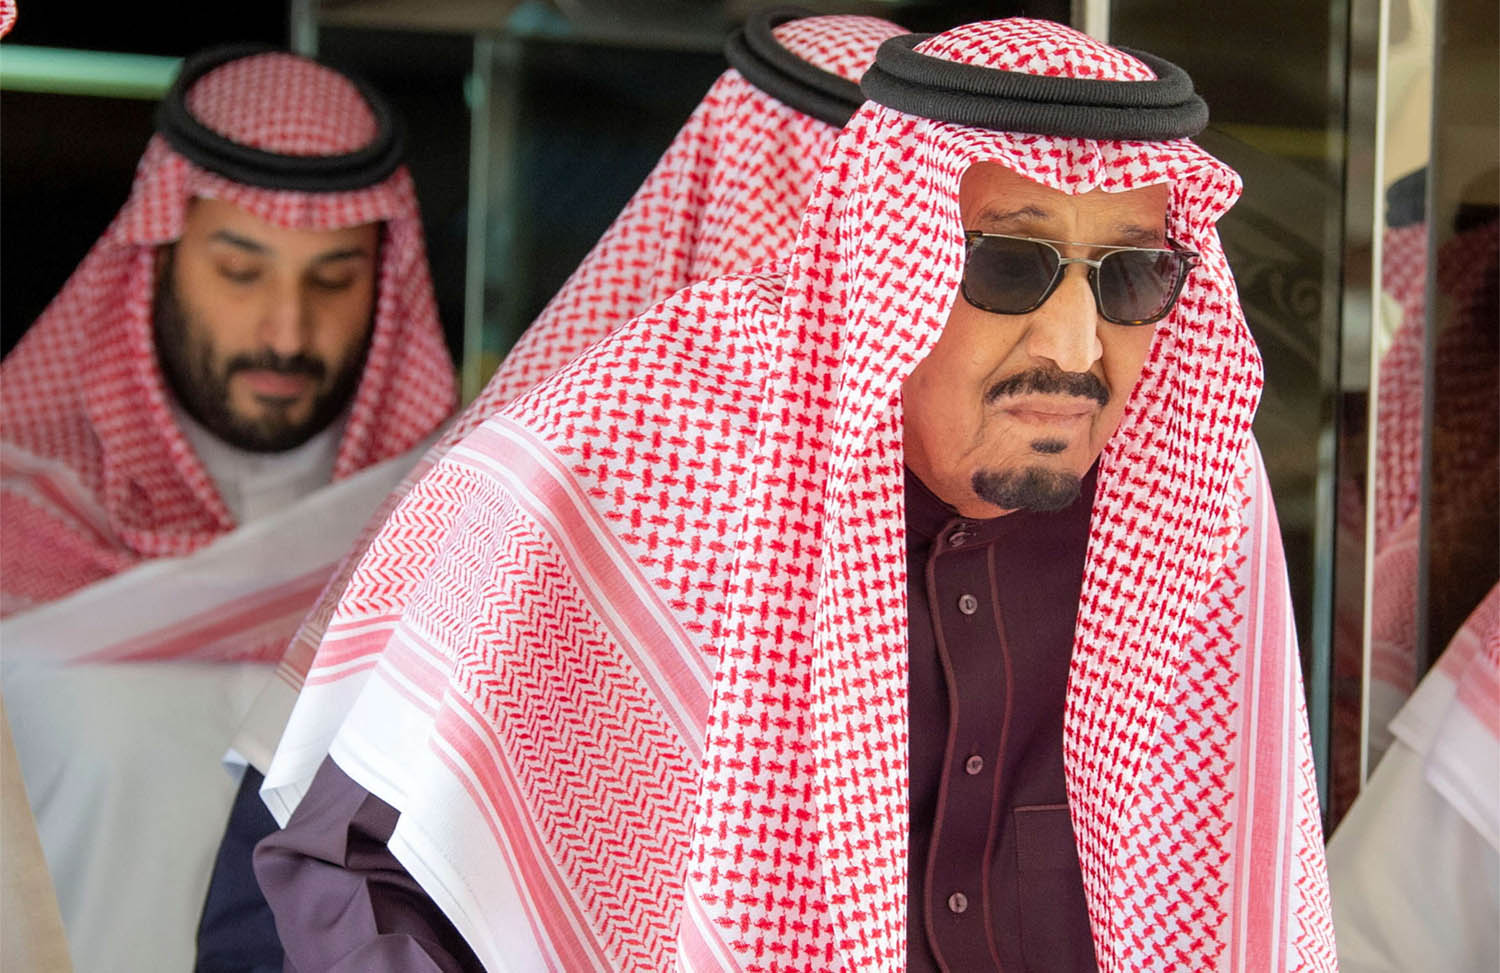 Doctors instructed King Salman to stay in the hospital for “some time” to rest